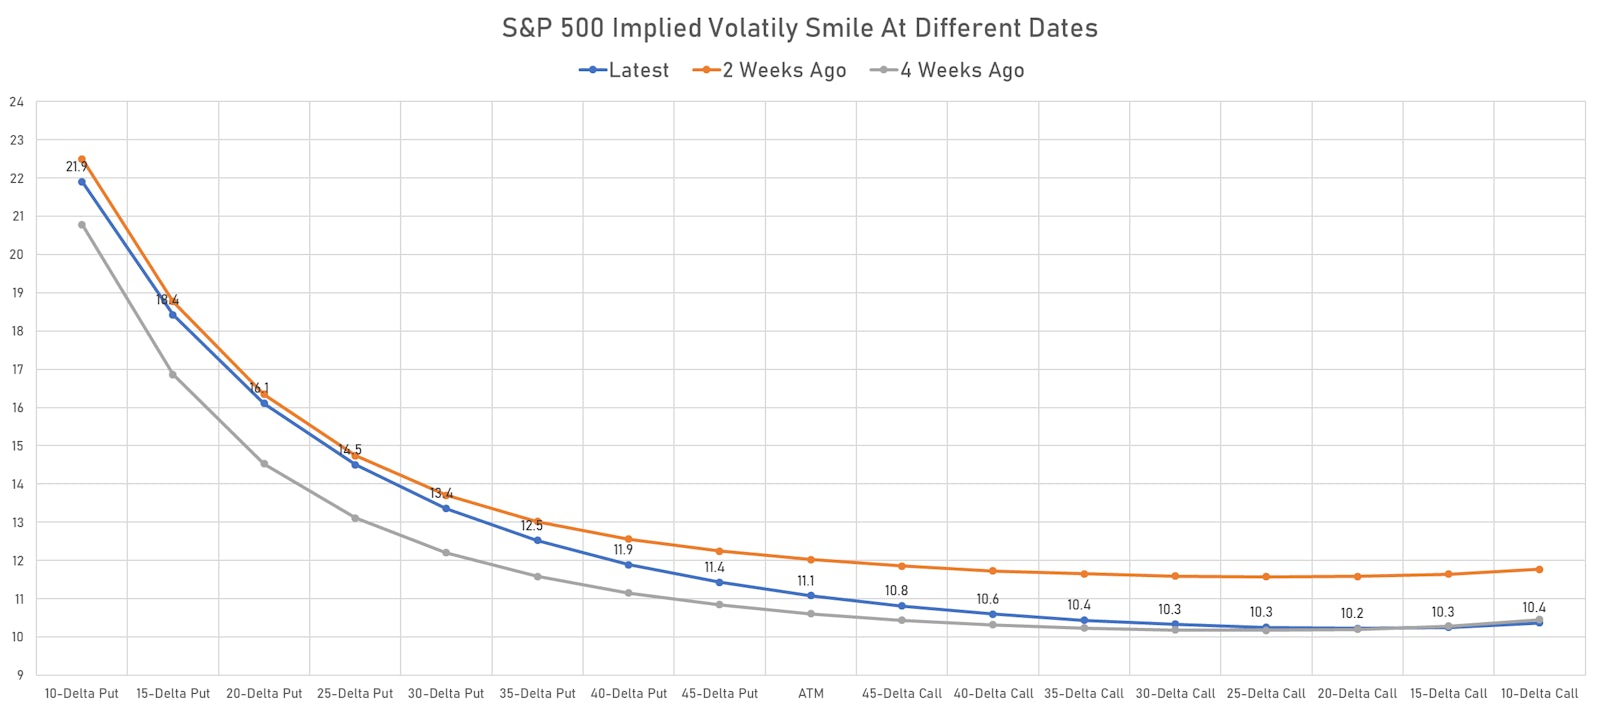 The S&P 500 implied volatility smile has been increasingly skewed to the downside over the past weeks | Sources: ϕpost, Refinitiv data